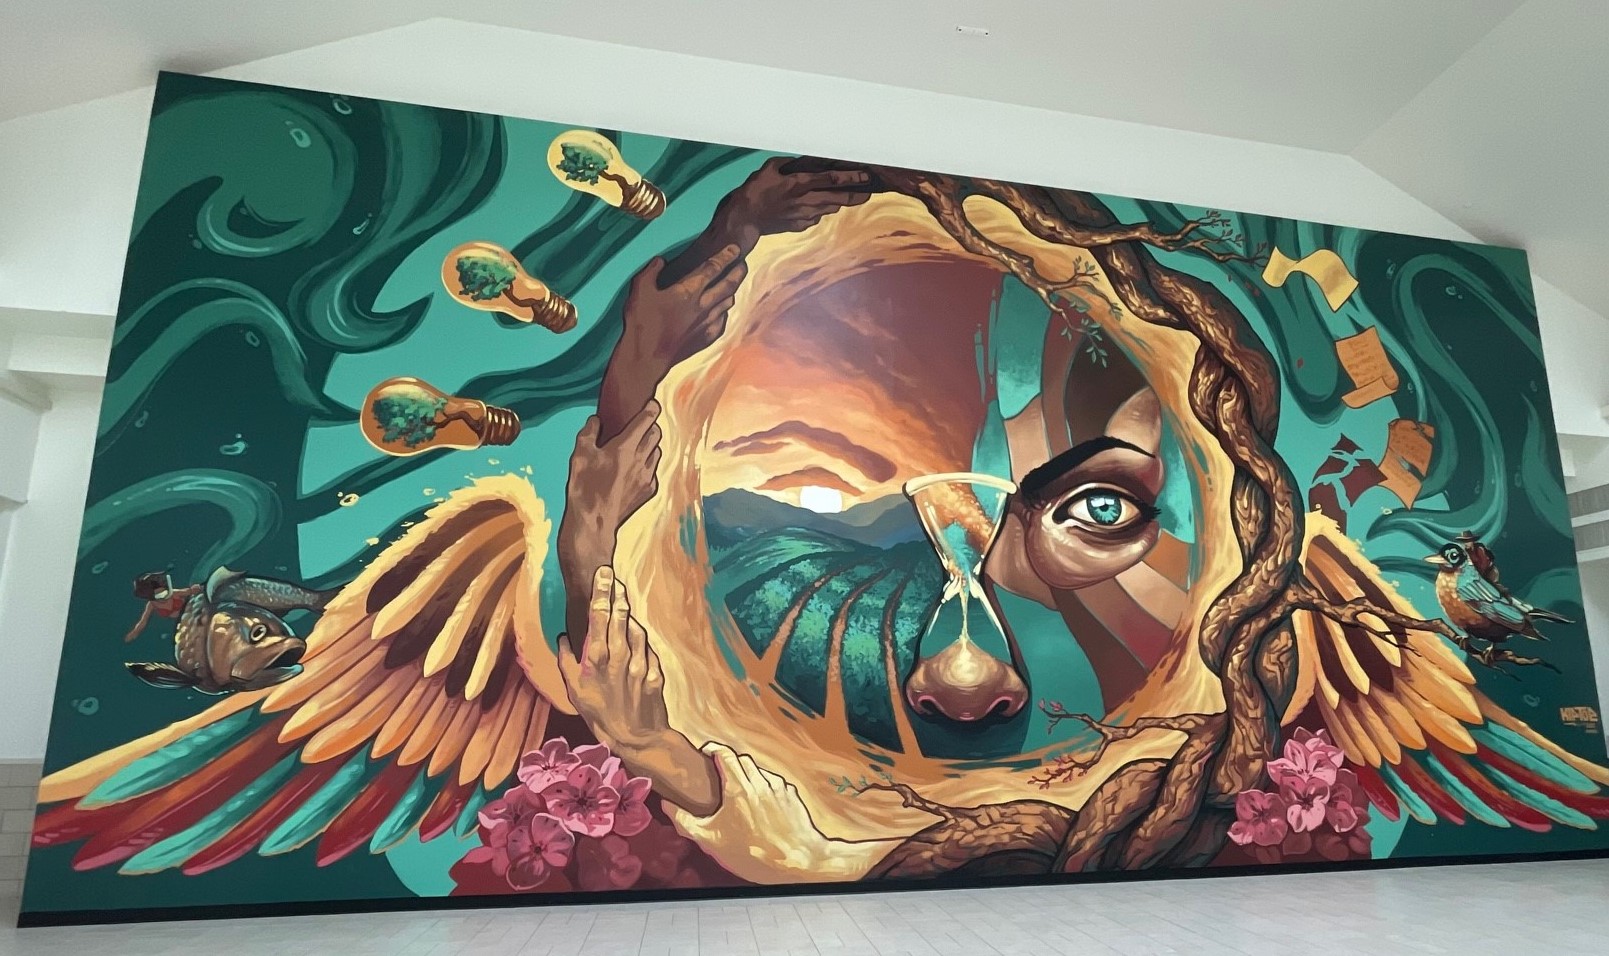 art mural with a face at the center and pieces of nature surrounding the face